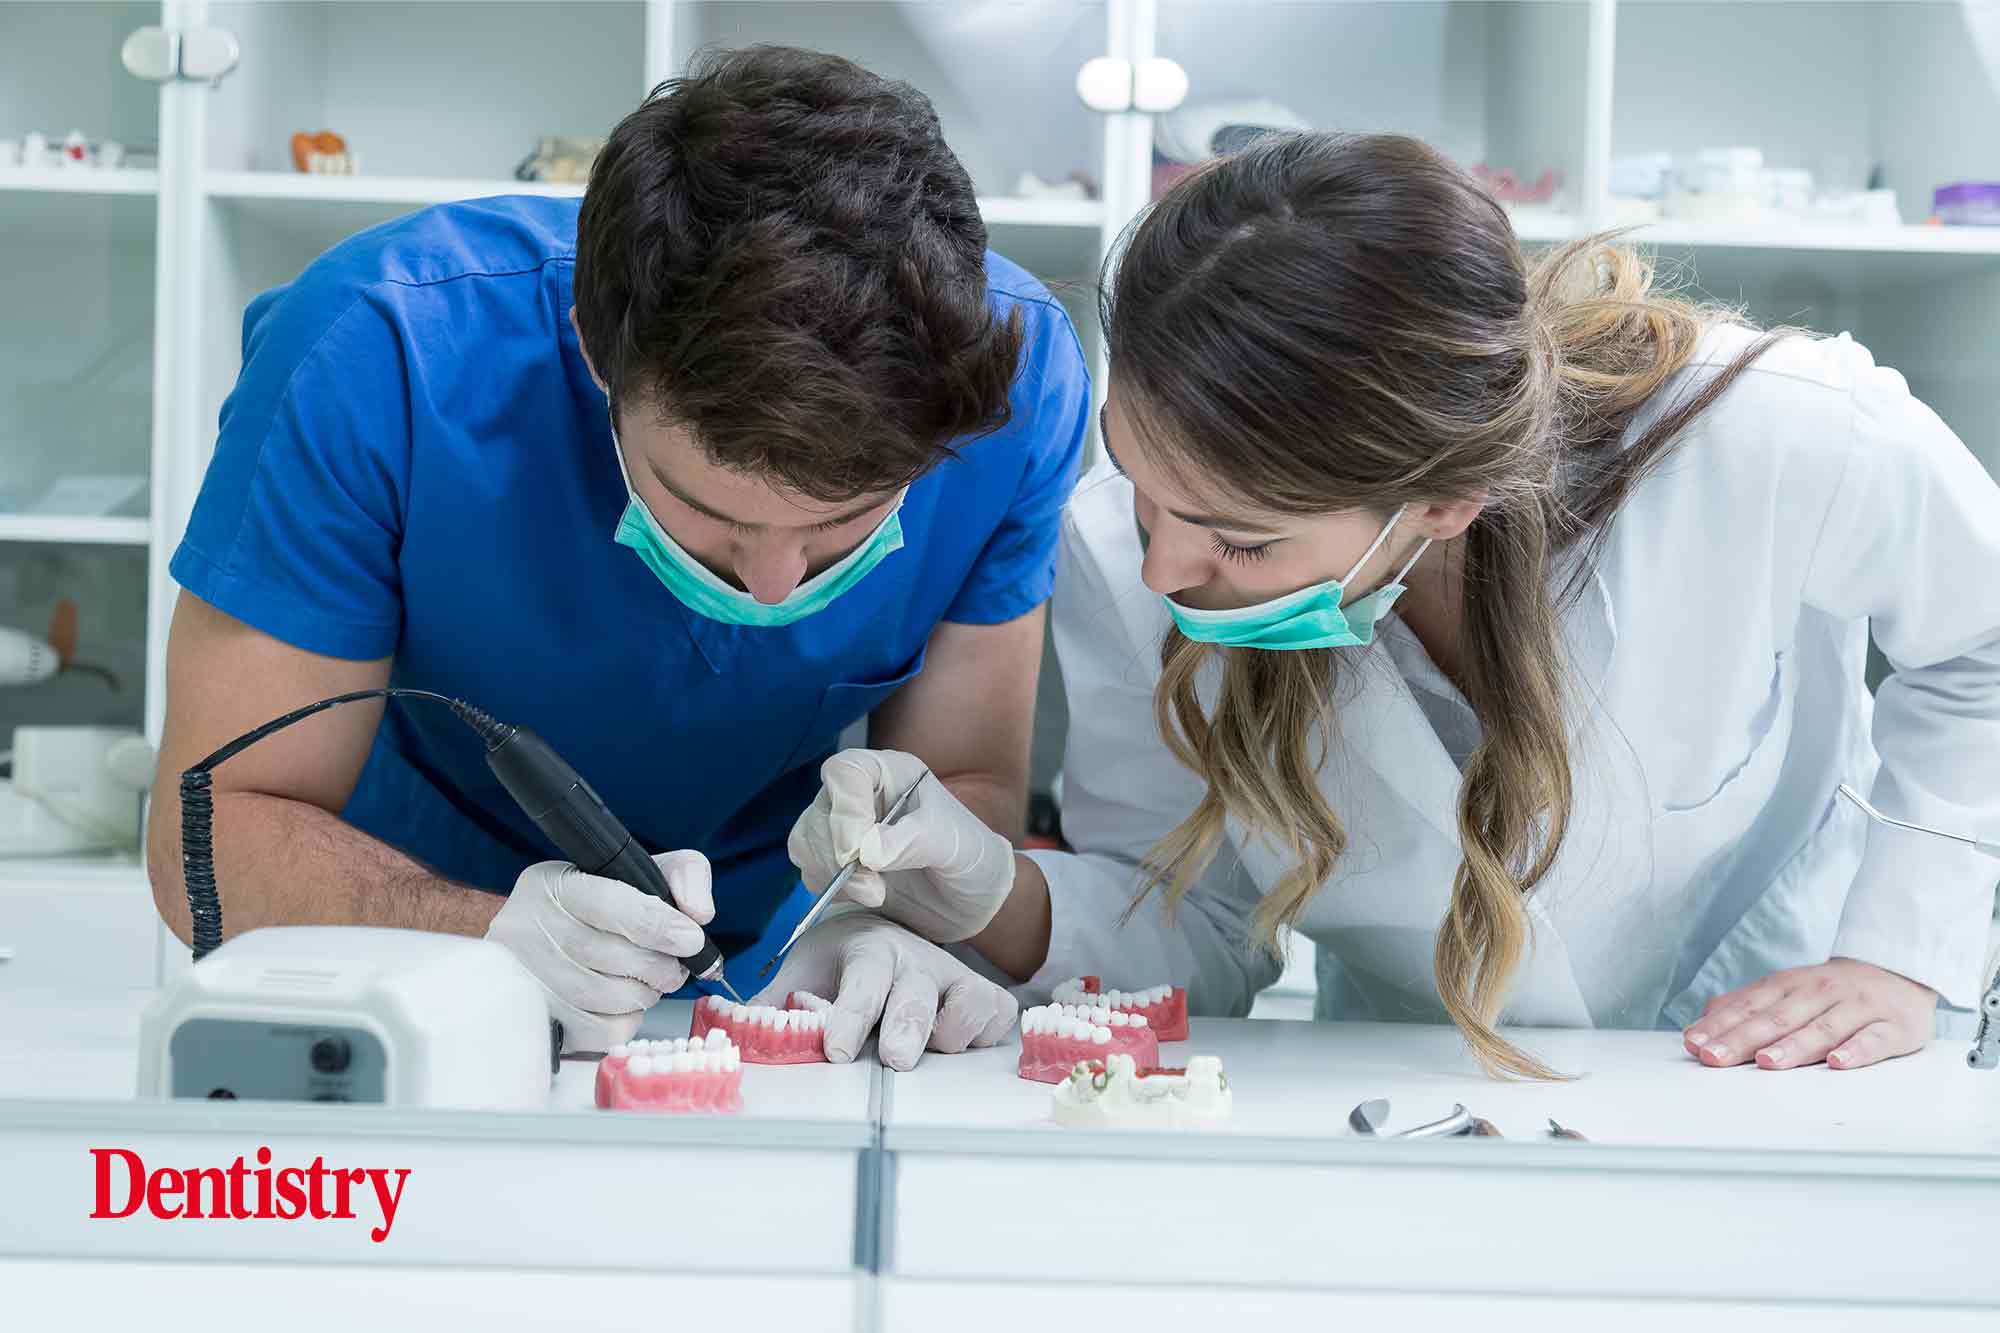 Dental students offered £10,000 to change universities in 2021